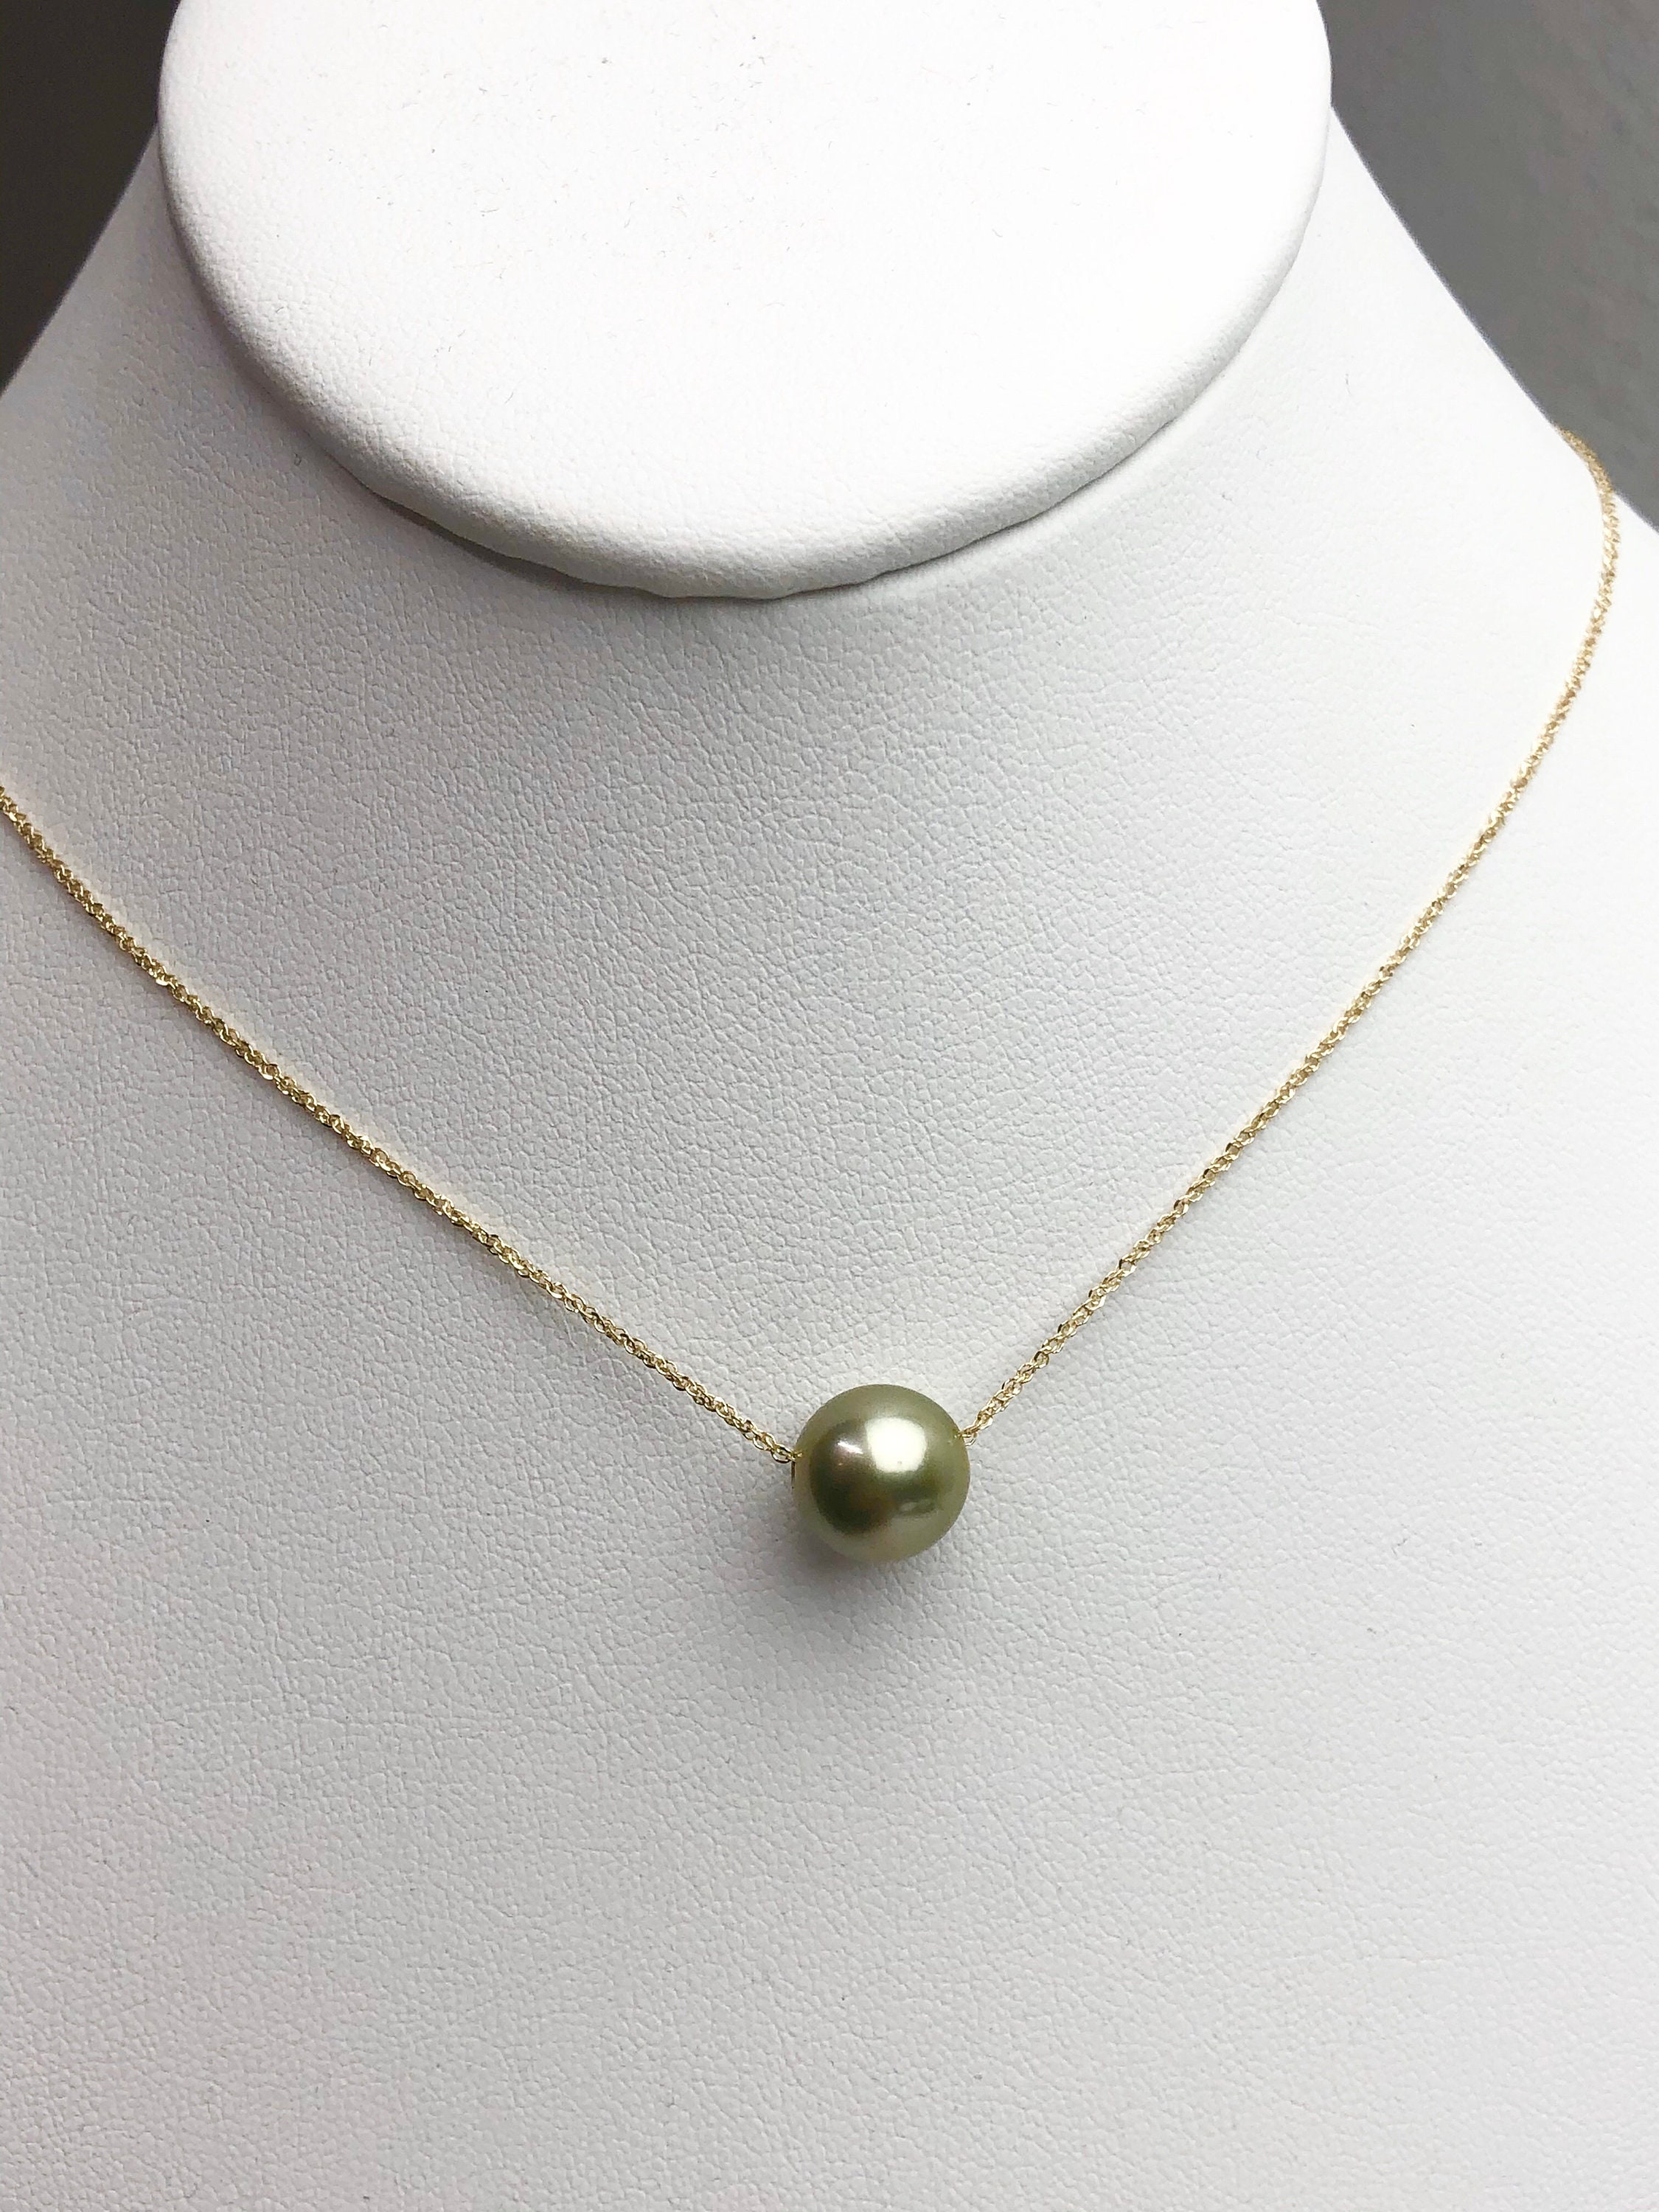 Floating Black Pearl Necklace on Gold Filled or Silver Chain, Popular  Minimalist Necklace, Bridesmaid Gift, Made in Hawaii With Aloha - Etsy